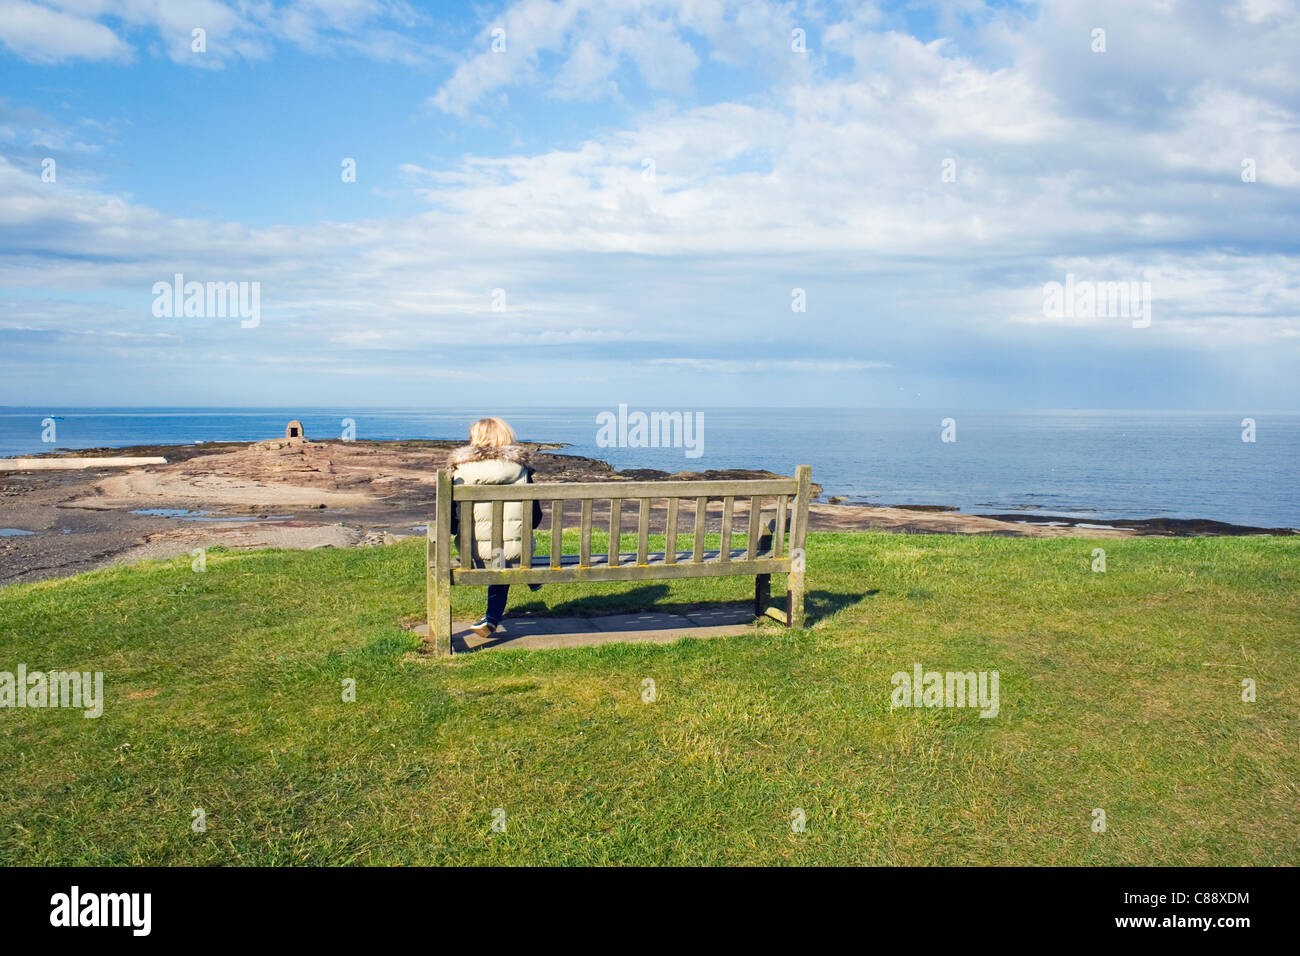 Solitary woman sitting on a bench overlooking the beach. Seahouses, Northumberland Coast, England. Stock Photo